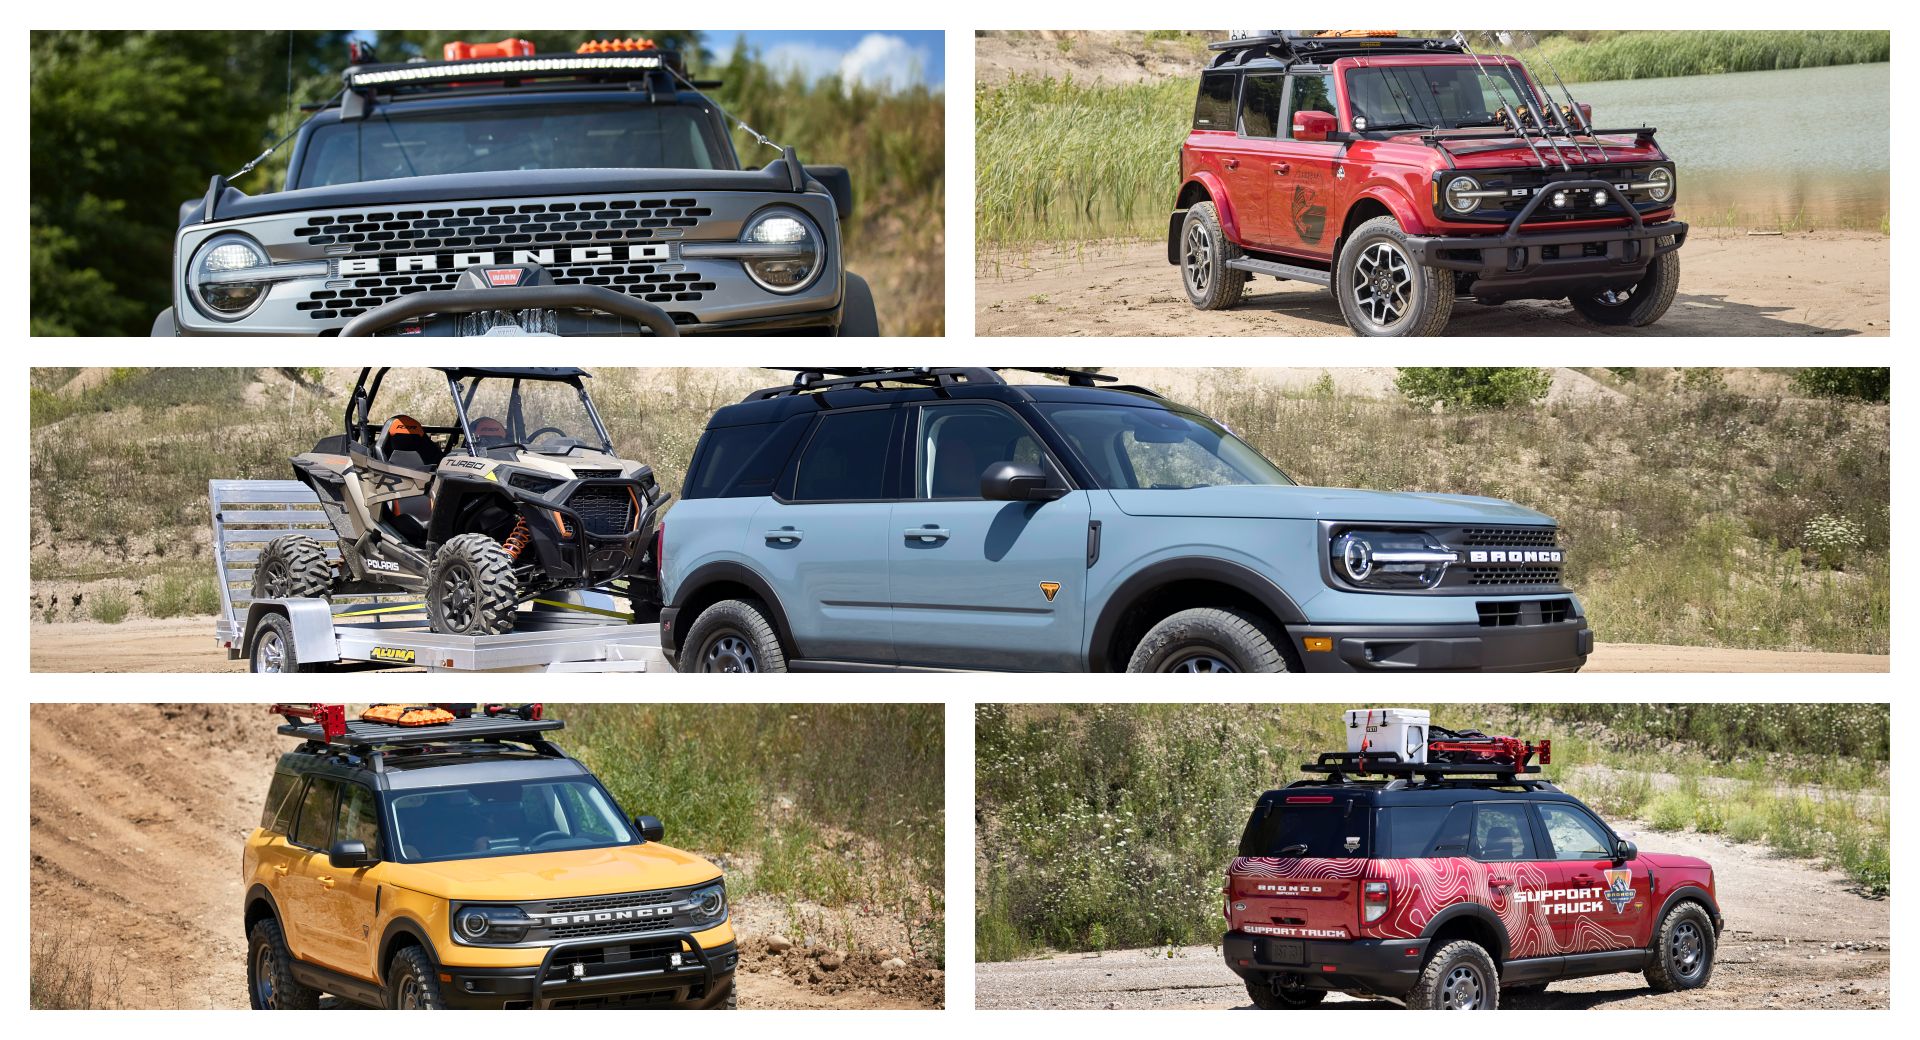 2021 Ford Bronco And Bronco Sport Concepts Showcase Wide Range Of  Accessories